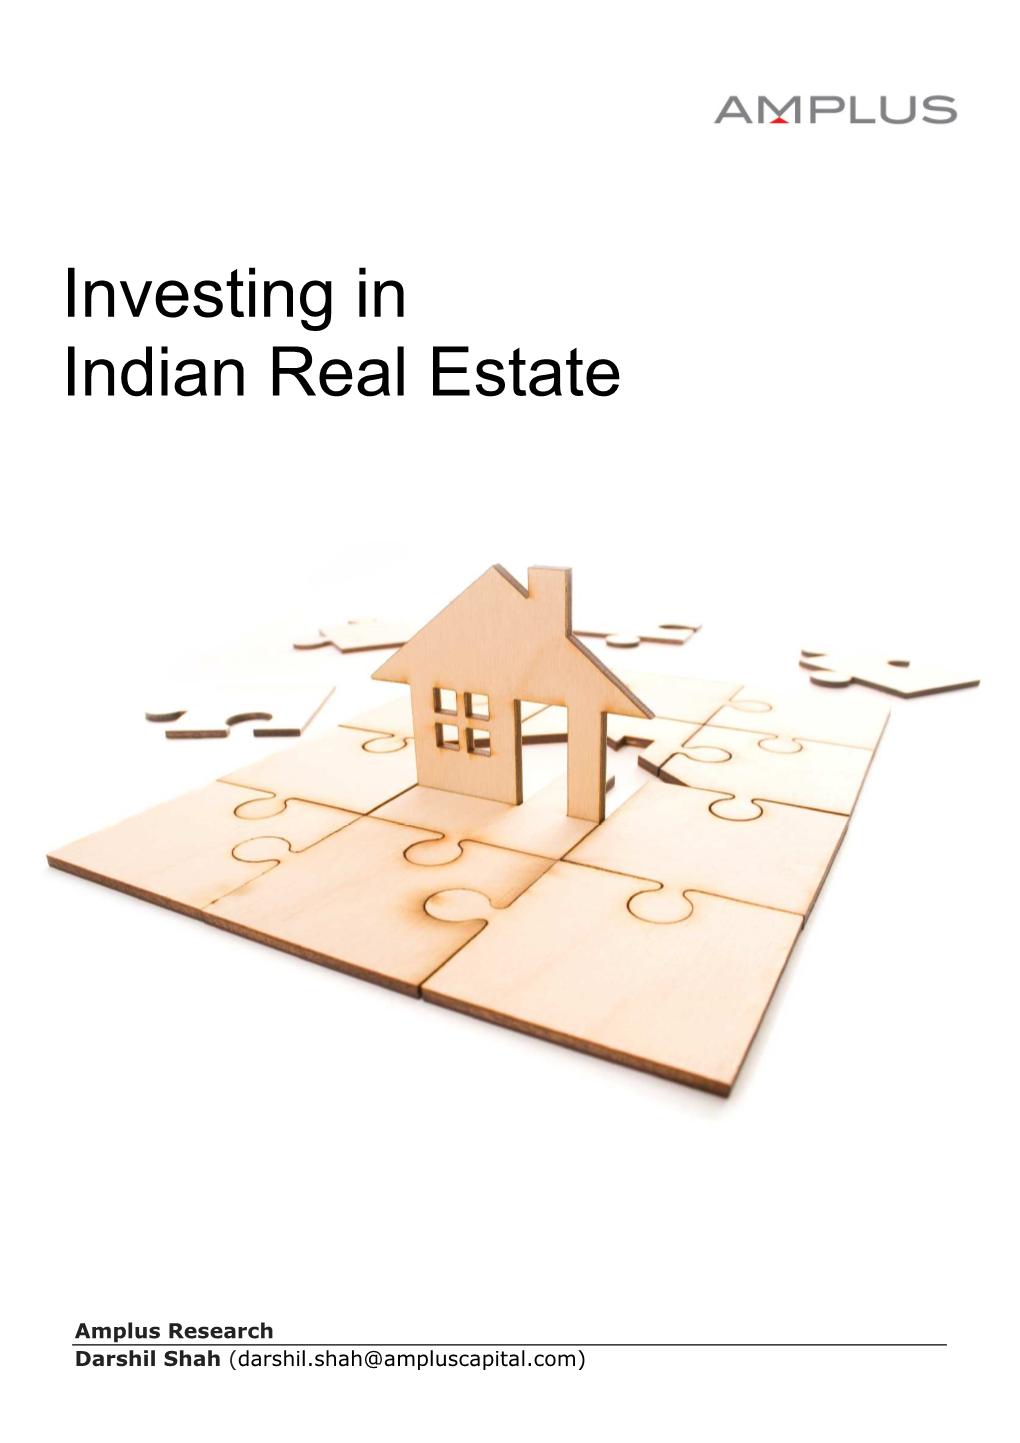 Investing in Indian Real Estate